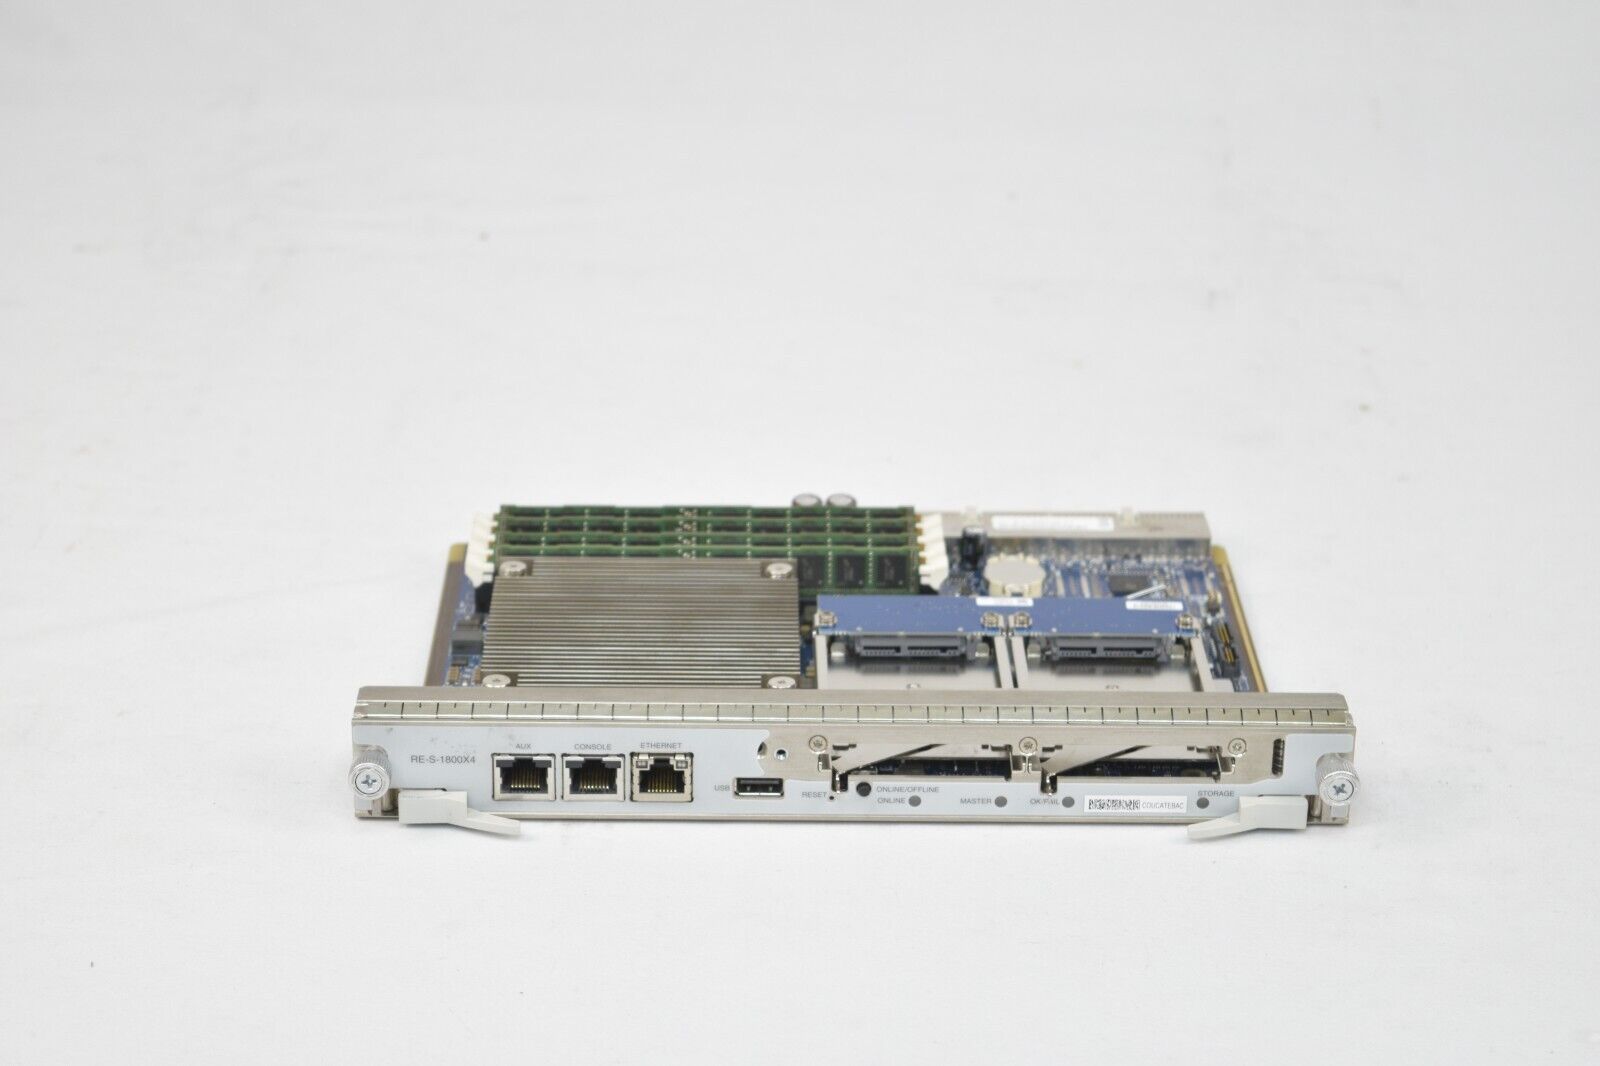 Juniper Networks RE-S-1800X4-32G 1.8Ghz  4-Core Routing Engine